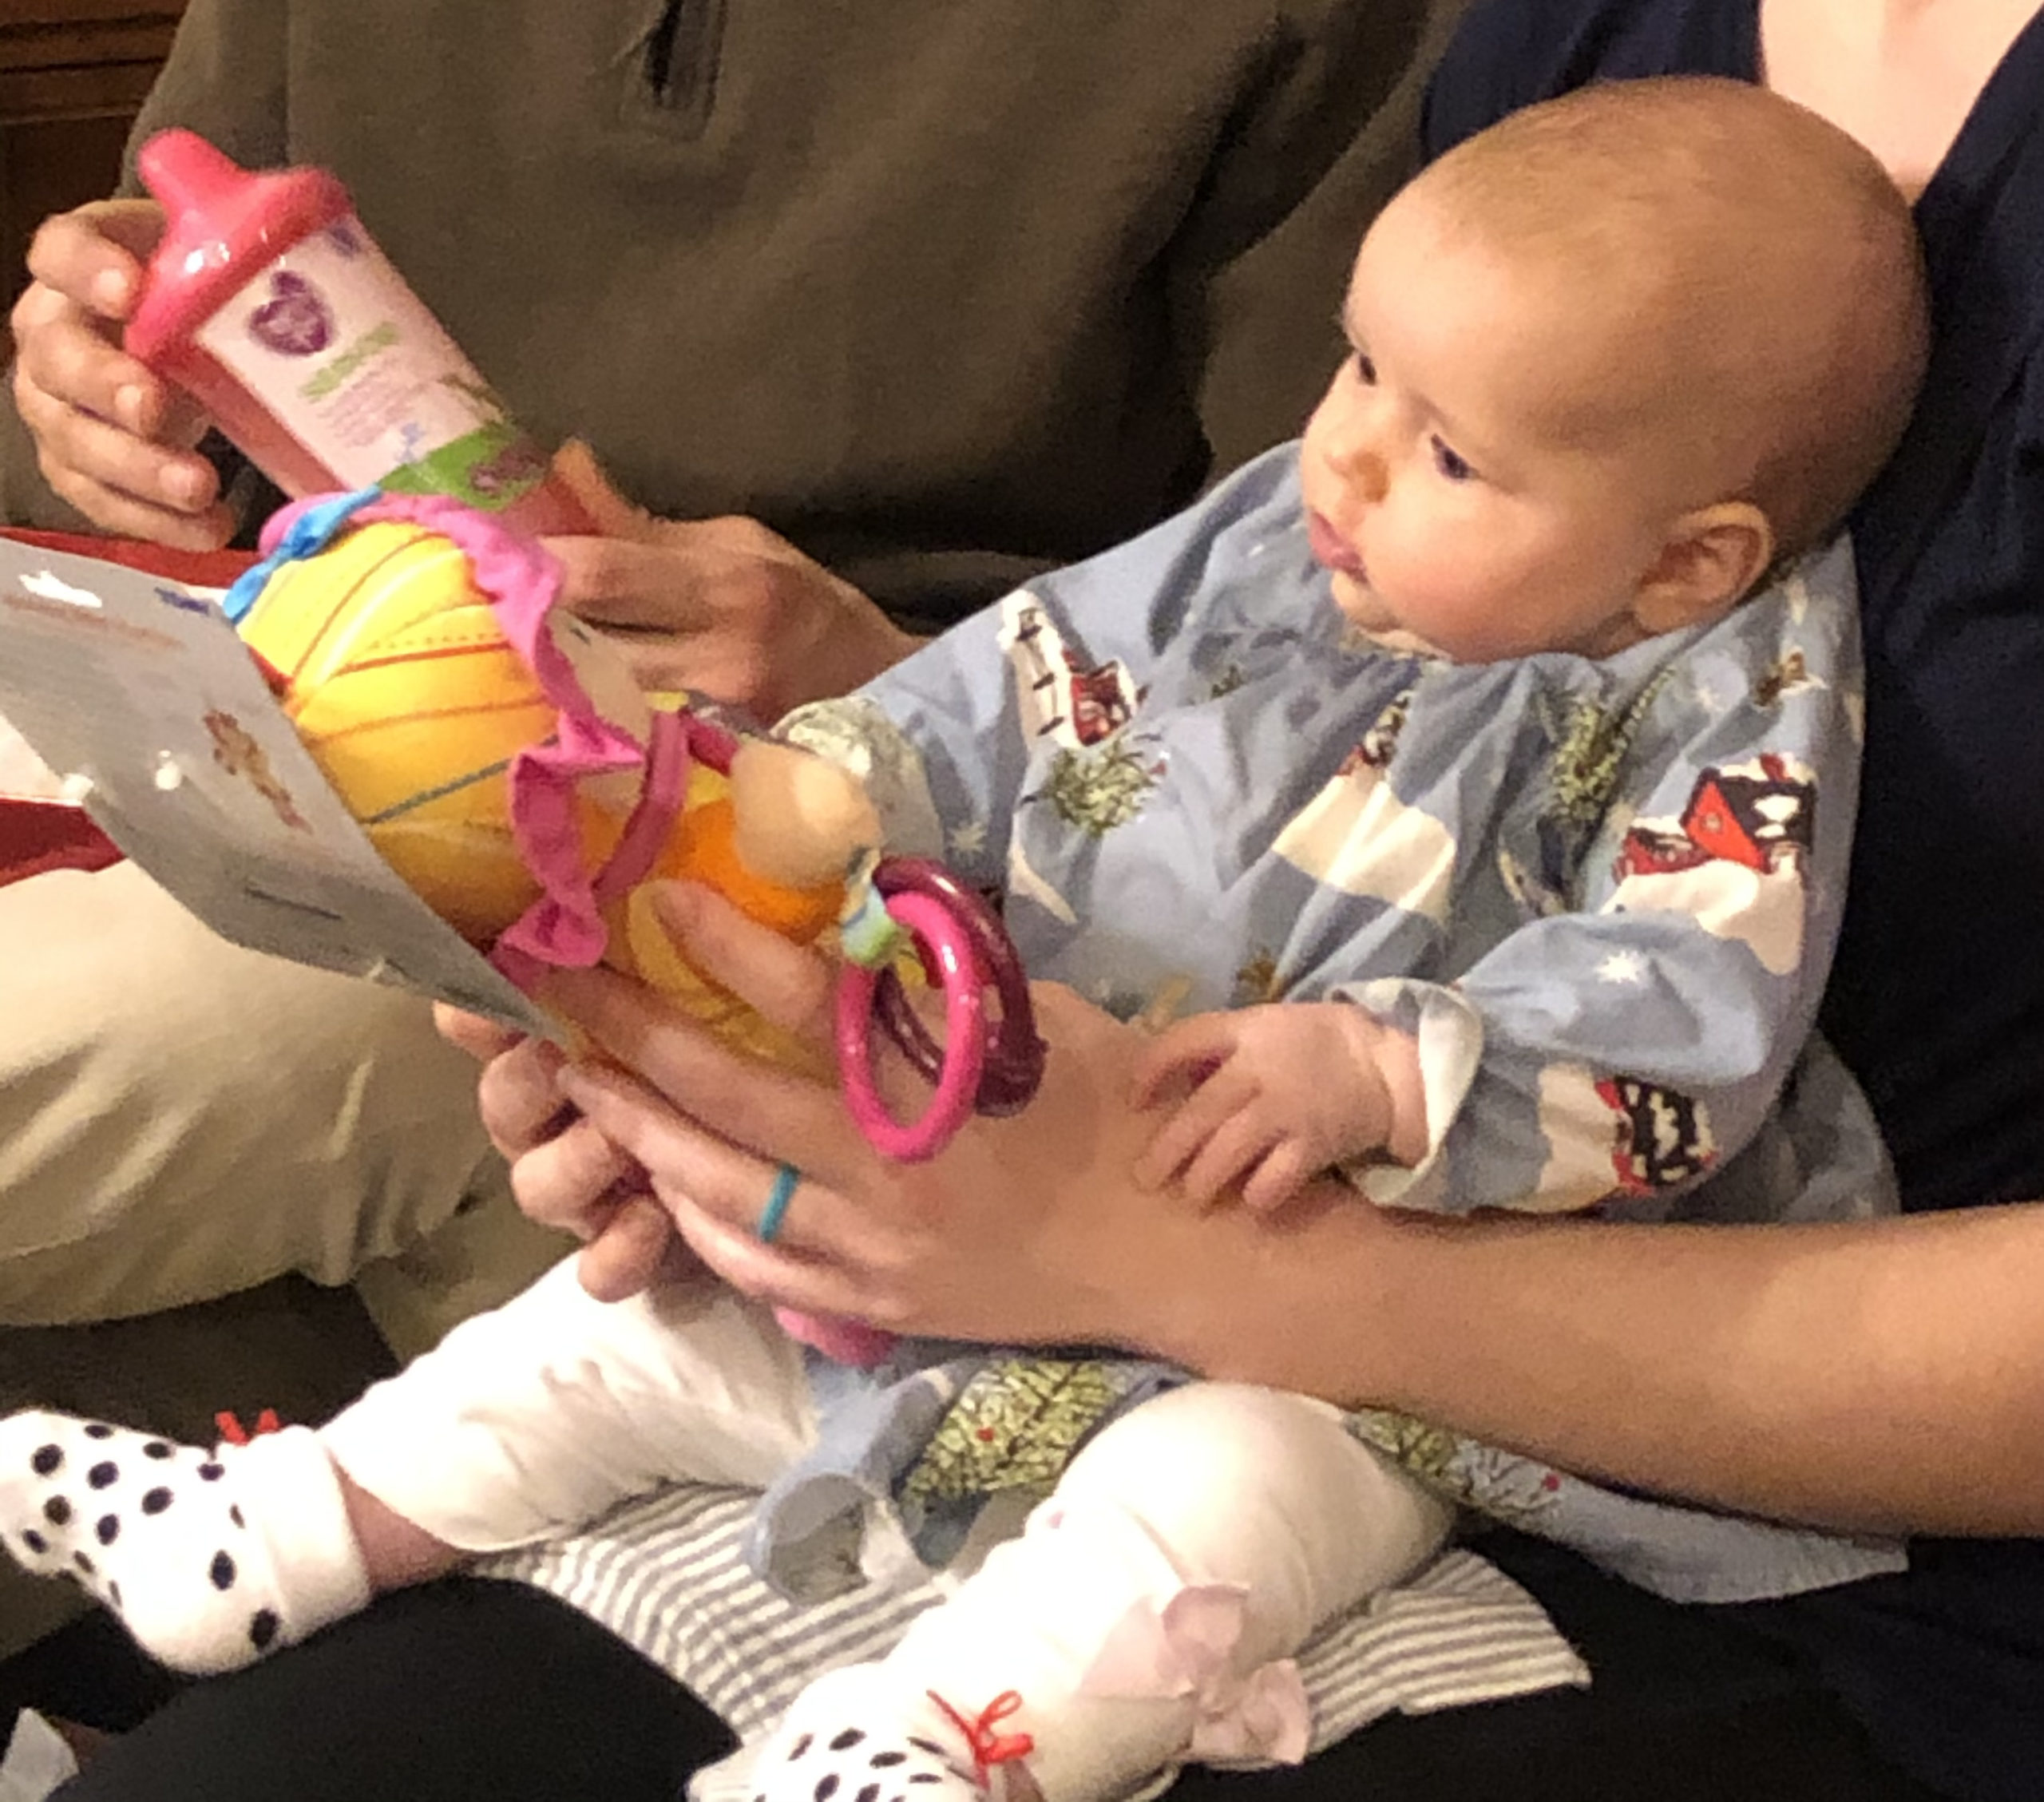 infant looking at the face of a stuffed doll with a yellow hat, outfit, and pink ribbon around the hat.